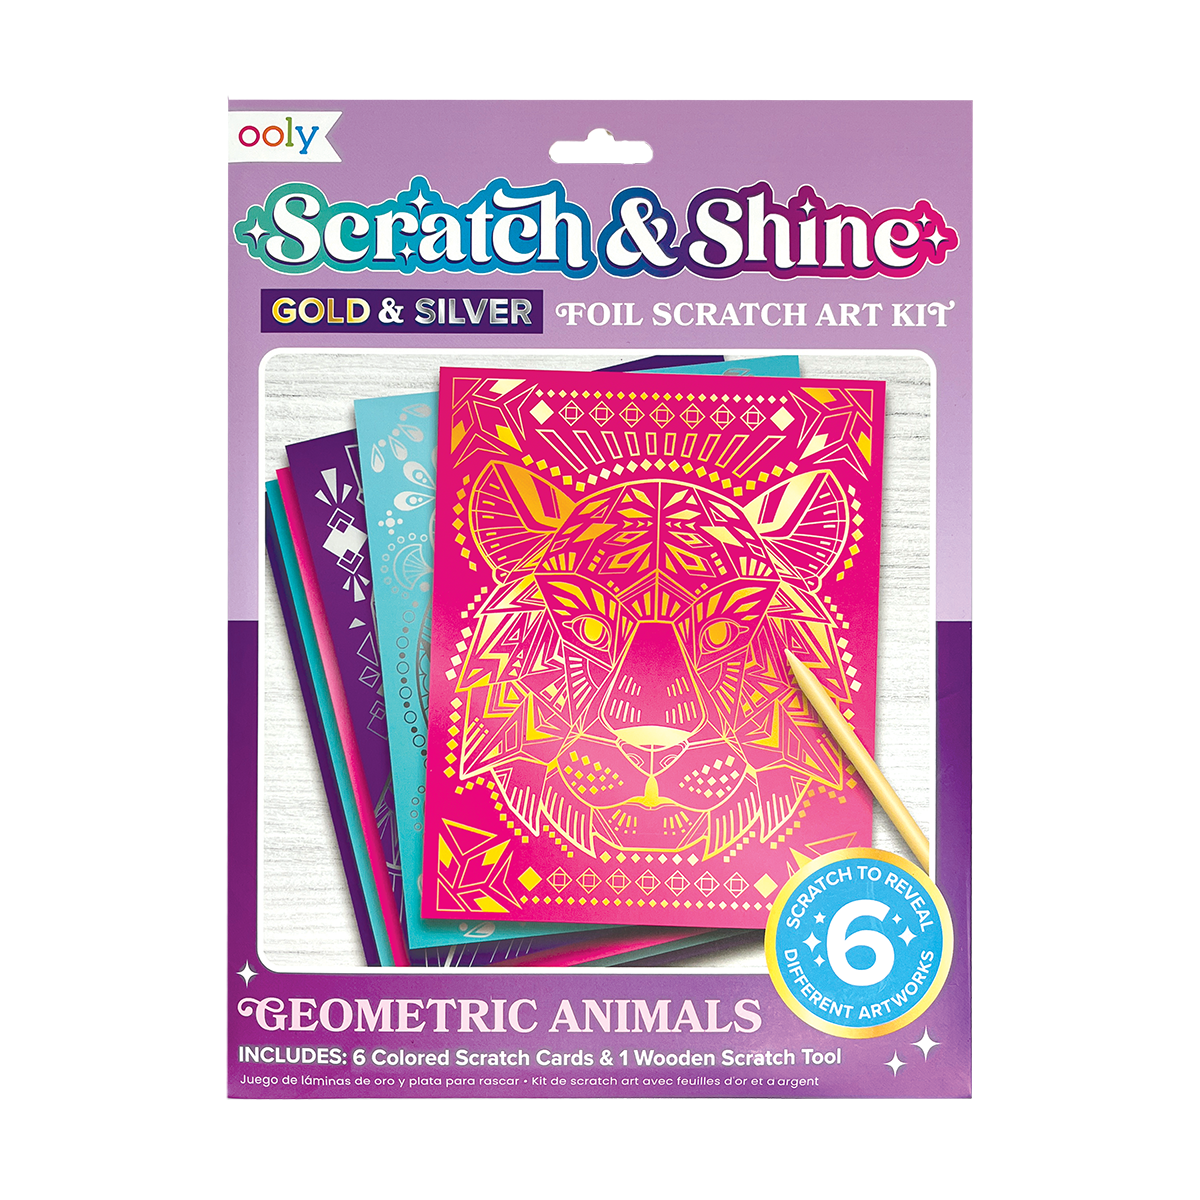 OOLY Scratch and Shine Foil Scratch Art Kit - Geometric Animals in packaging